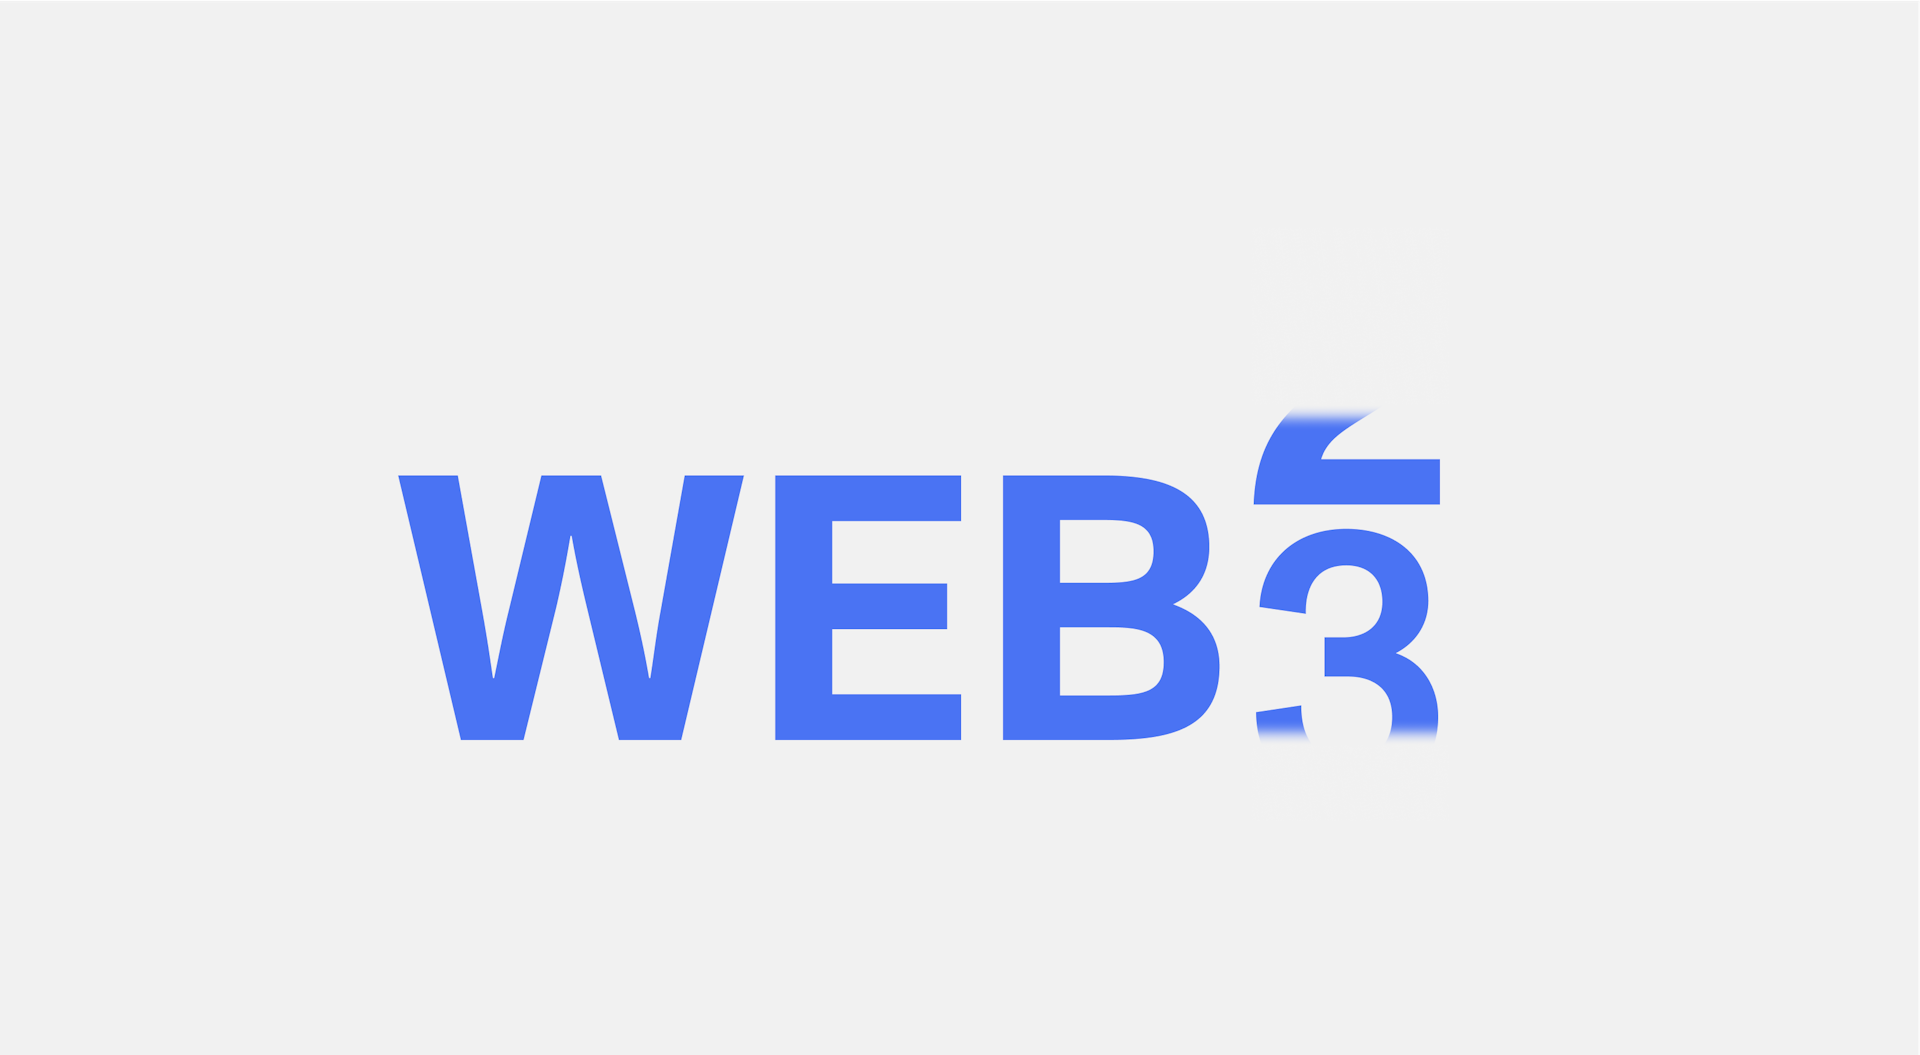 How Can Companies Prepare for Web3?